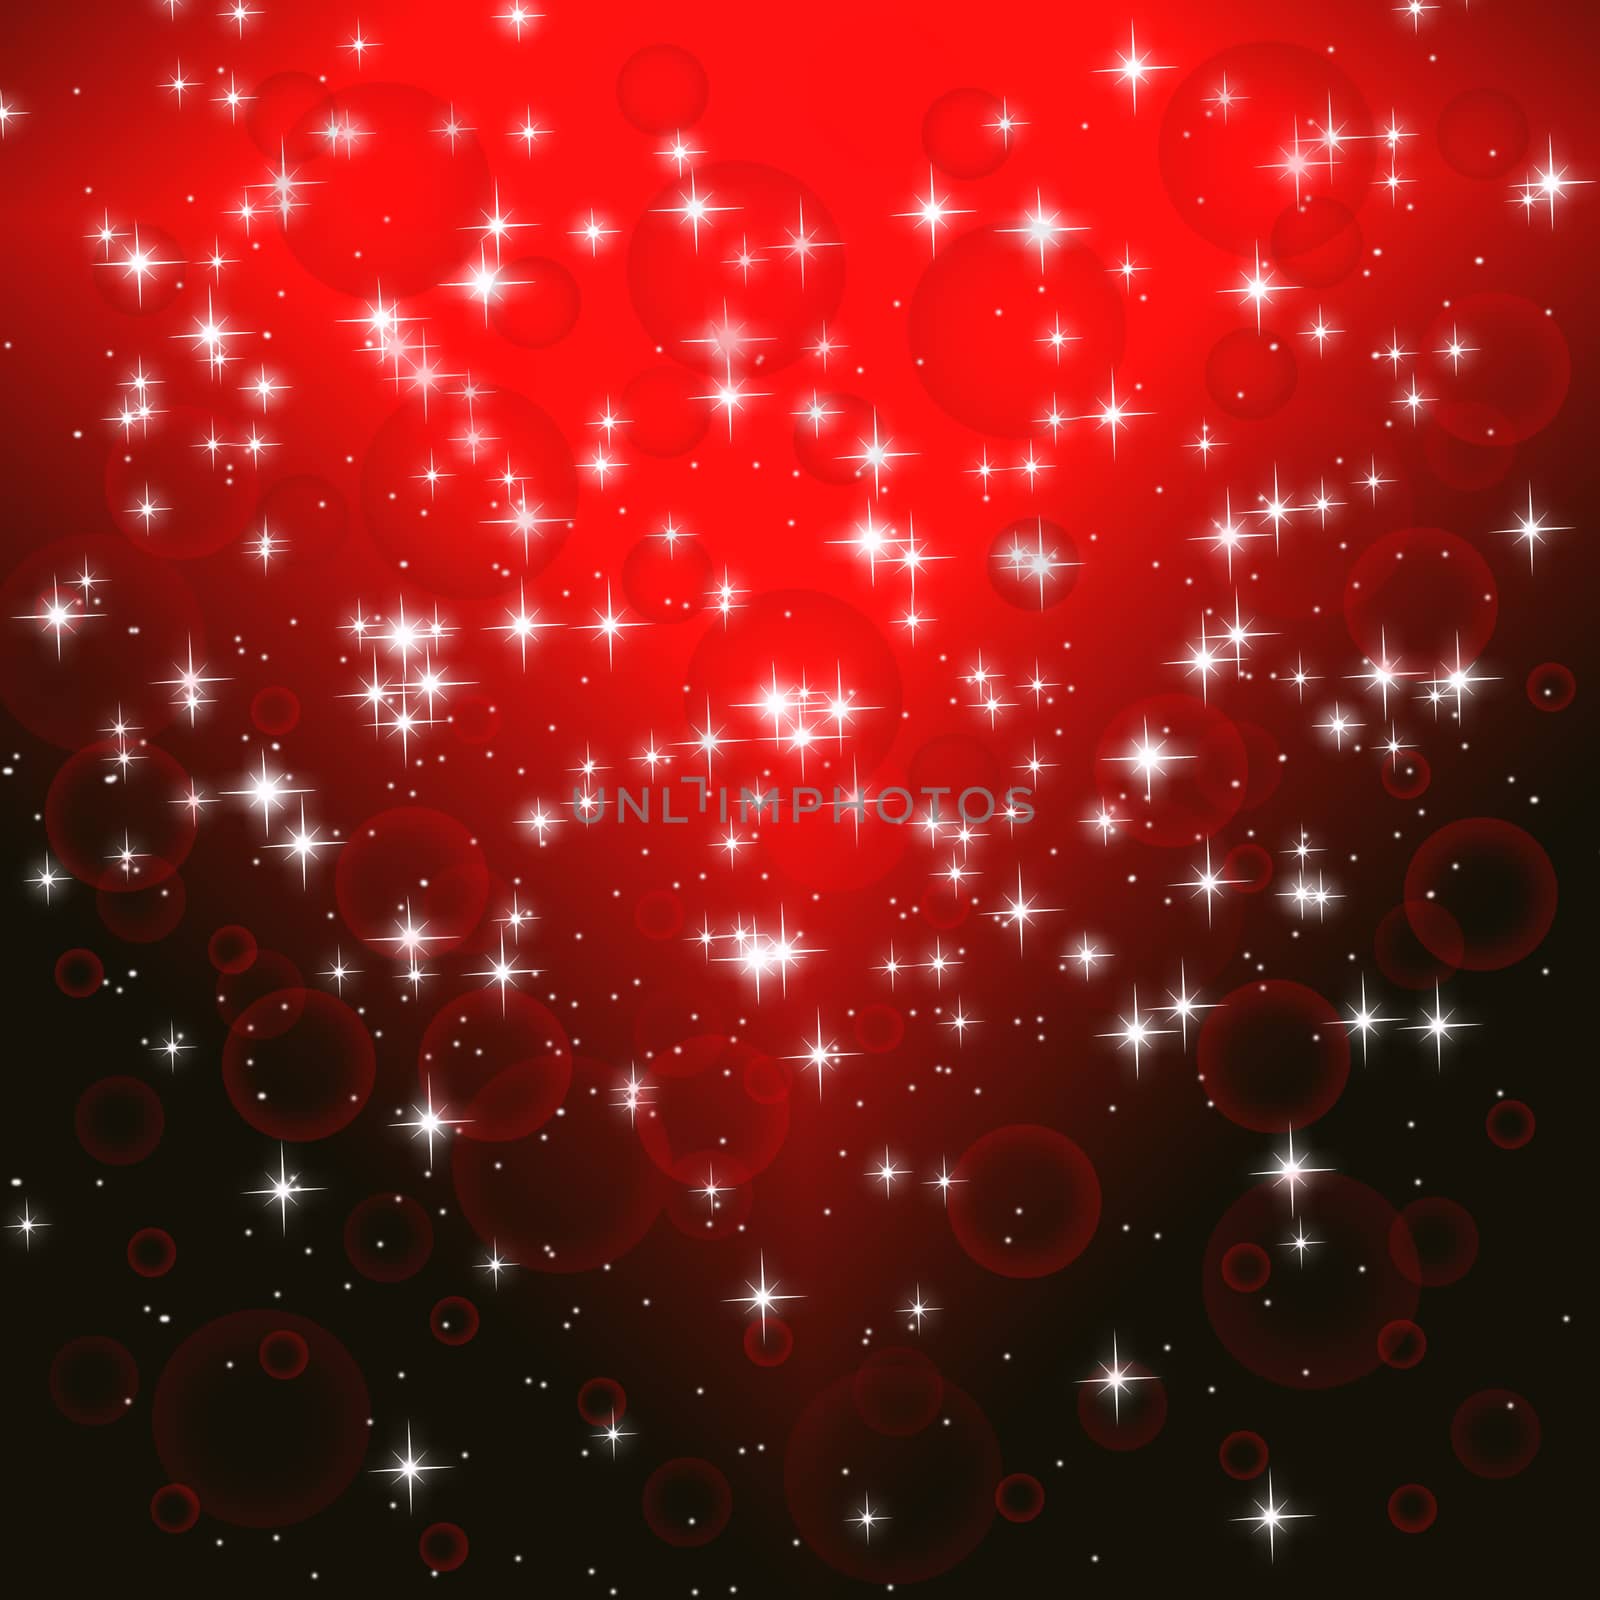 abstract red  background for Christmas